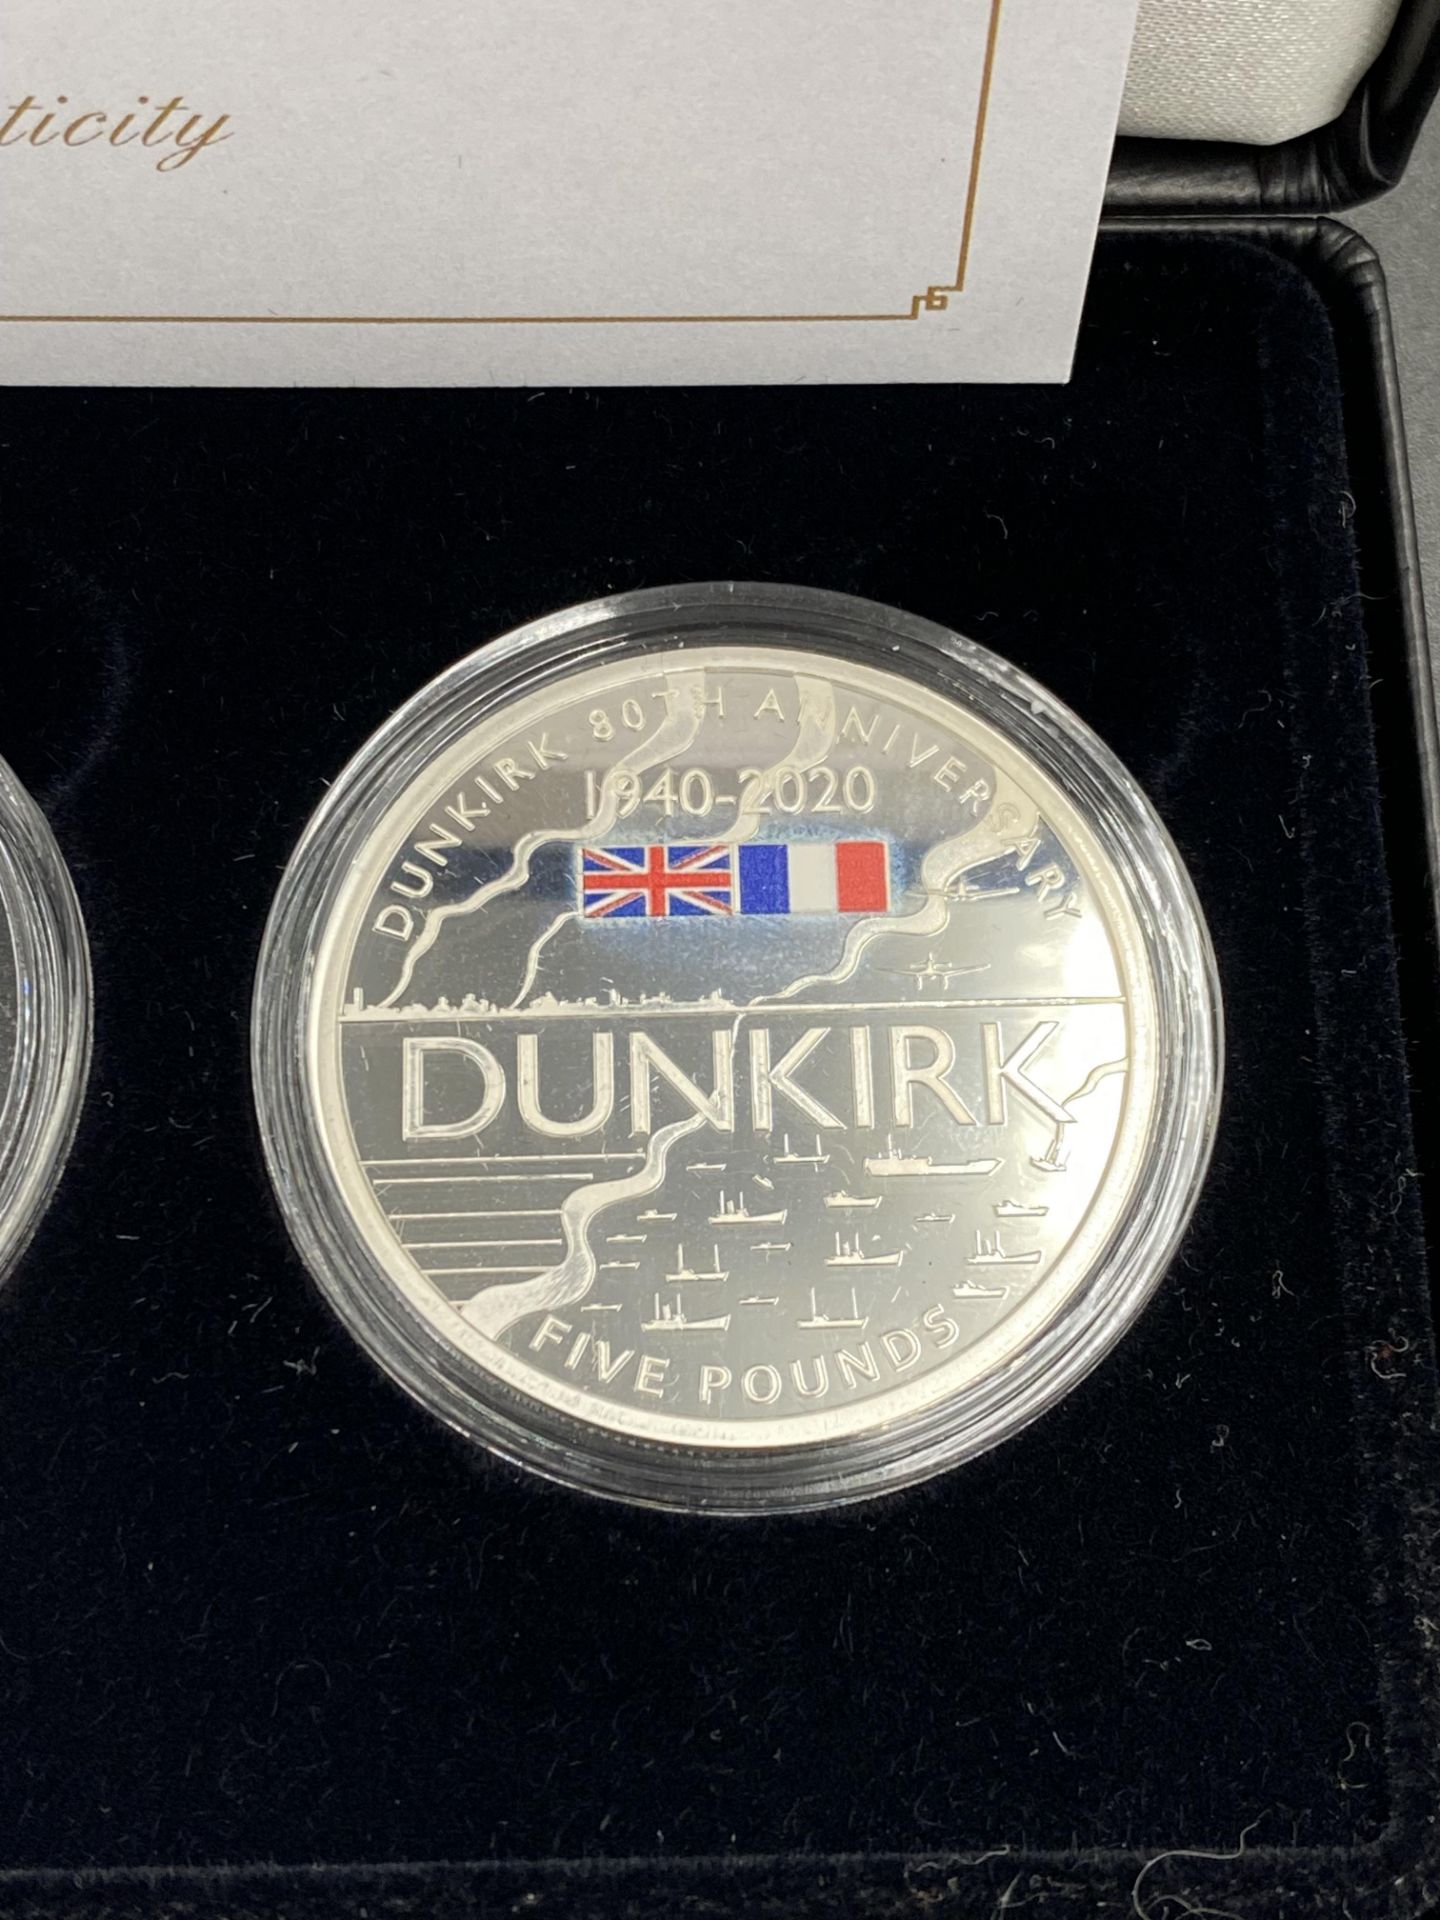 Jubilee mint 80th Anniversary of Dunkirk silver proof coin collection - Image 4 of 5